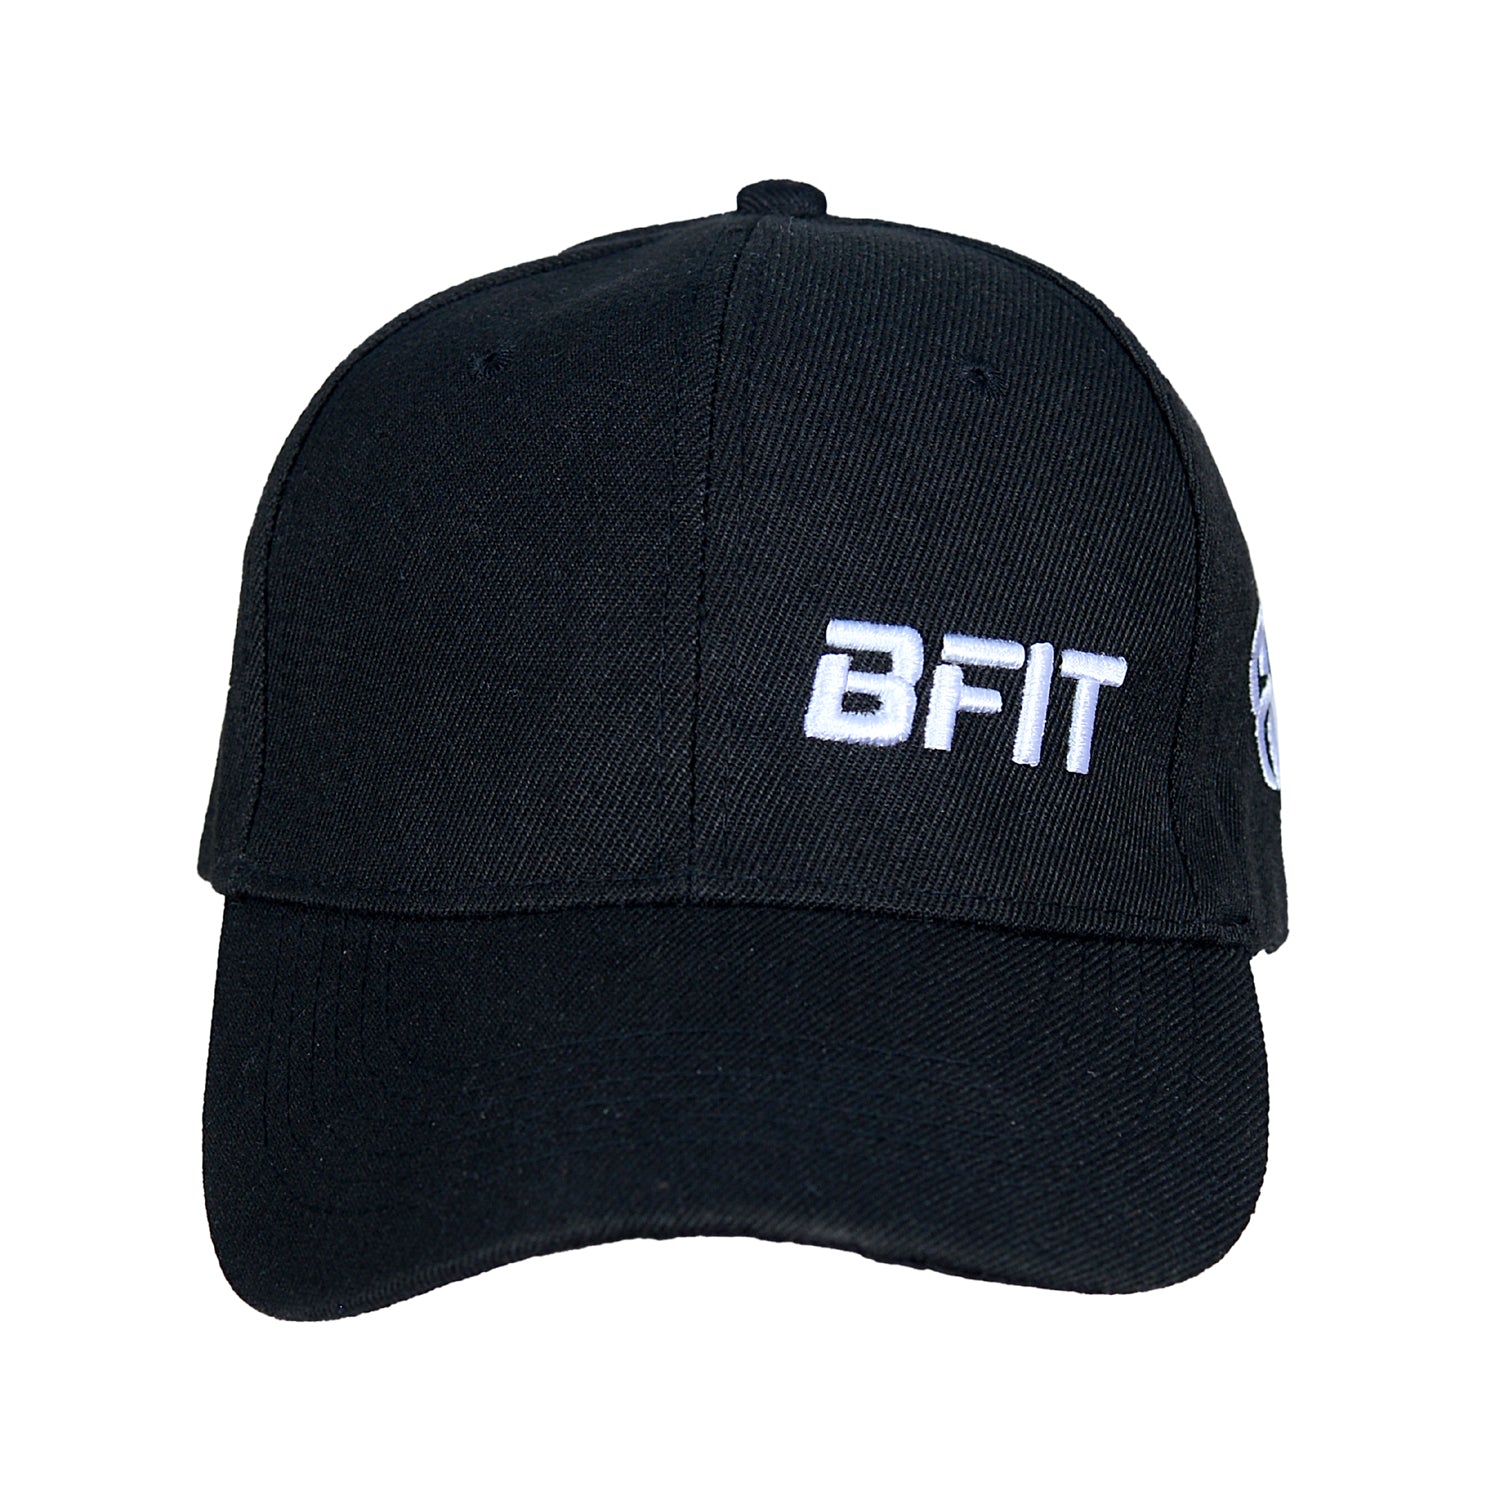 Relaxed Fit Performance Hat Black